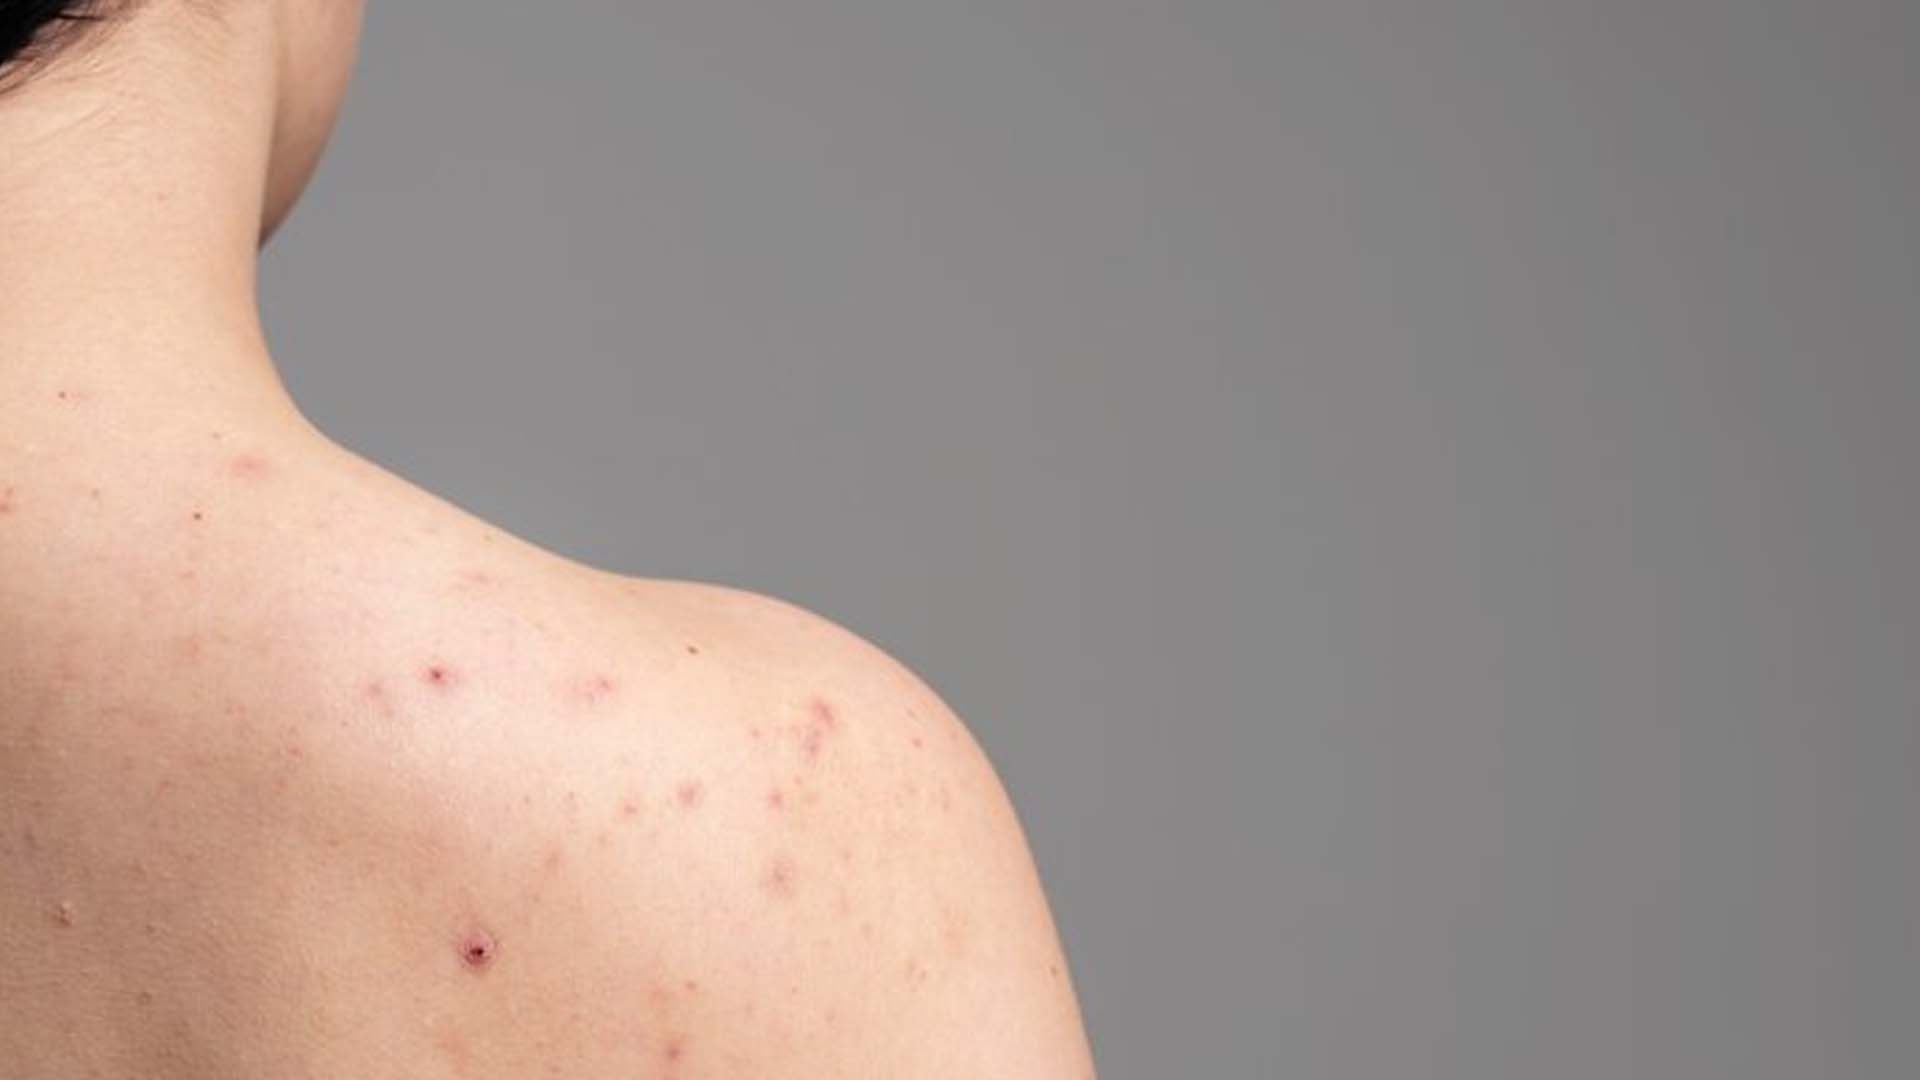 What are the Home Remedies to control Pimples on the Back and Shoulders?